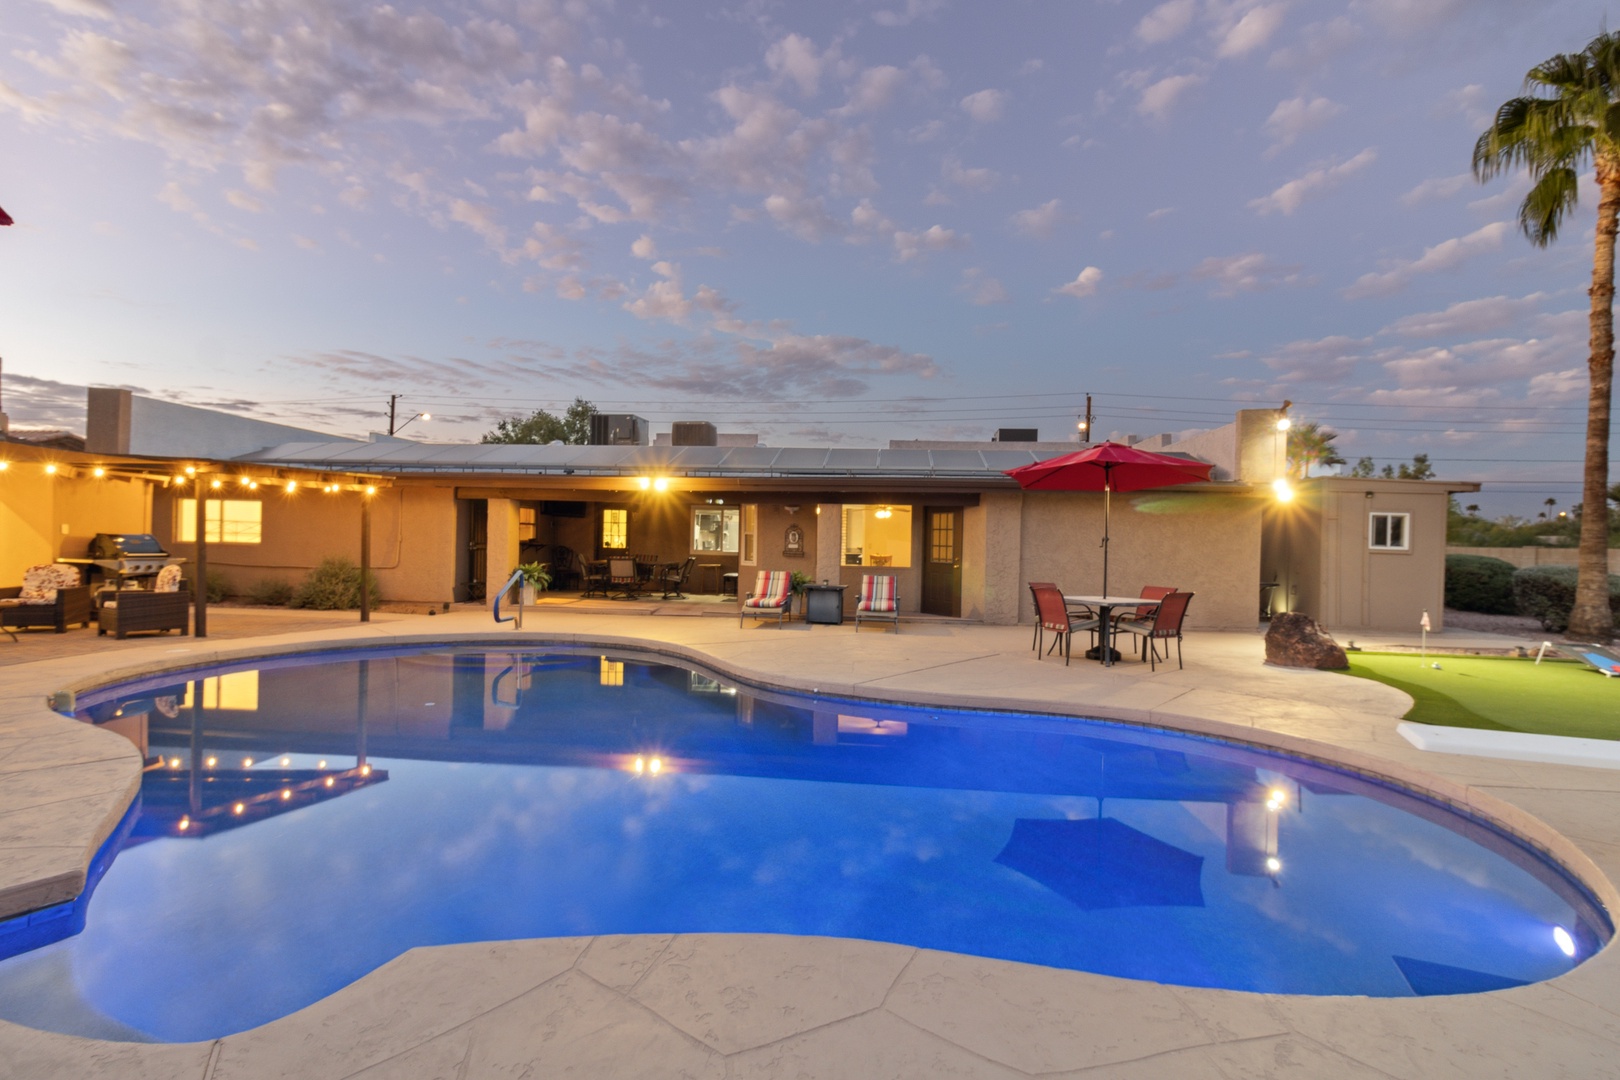 Scottsdale Vacation Rentals, OFB Thunderbird Retreat - Dip your toes in the pristine pool with an evening beverage